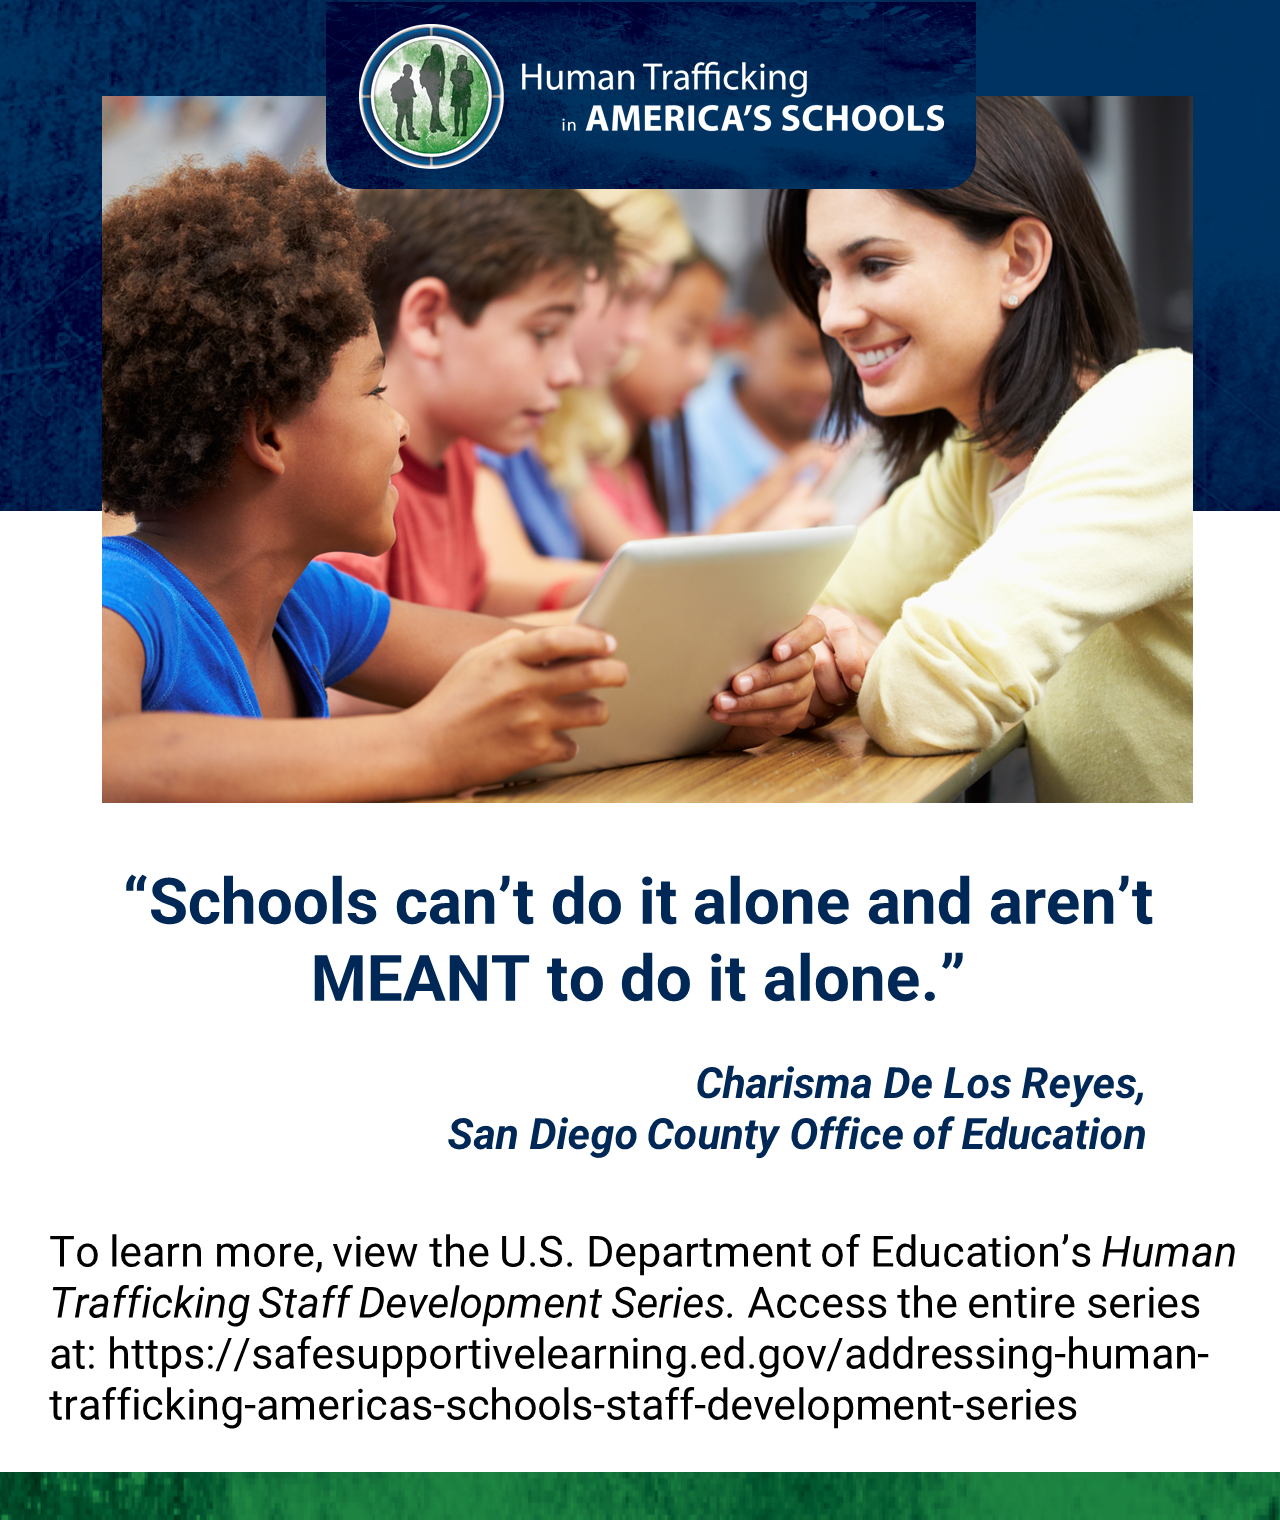 “Schools can’t do it alone and aren’t MEANT to do it alone.” Charisma De Los Reyes,  San Diego County Office of Education. To learn more, view the U.S. Department of Education’s Human Trafficking Staff Development Series. Access the entire series here.